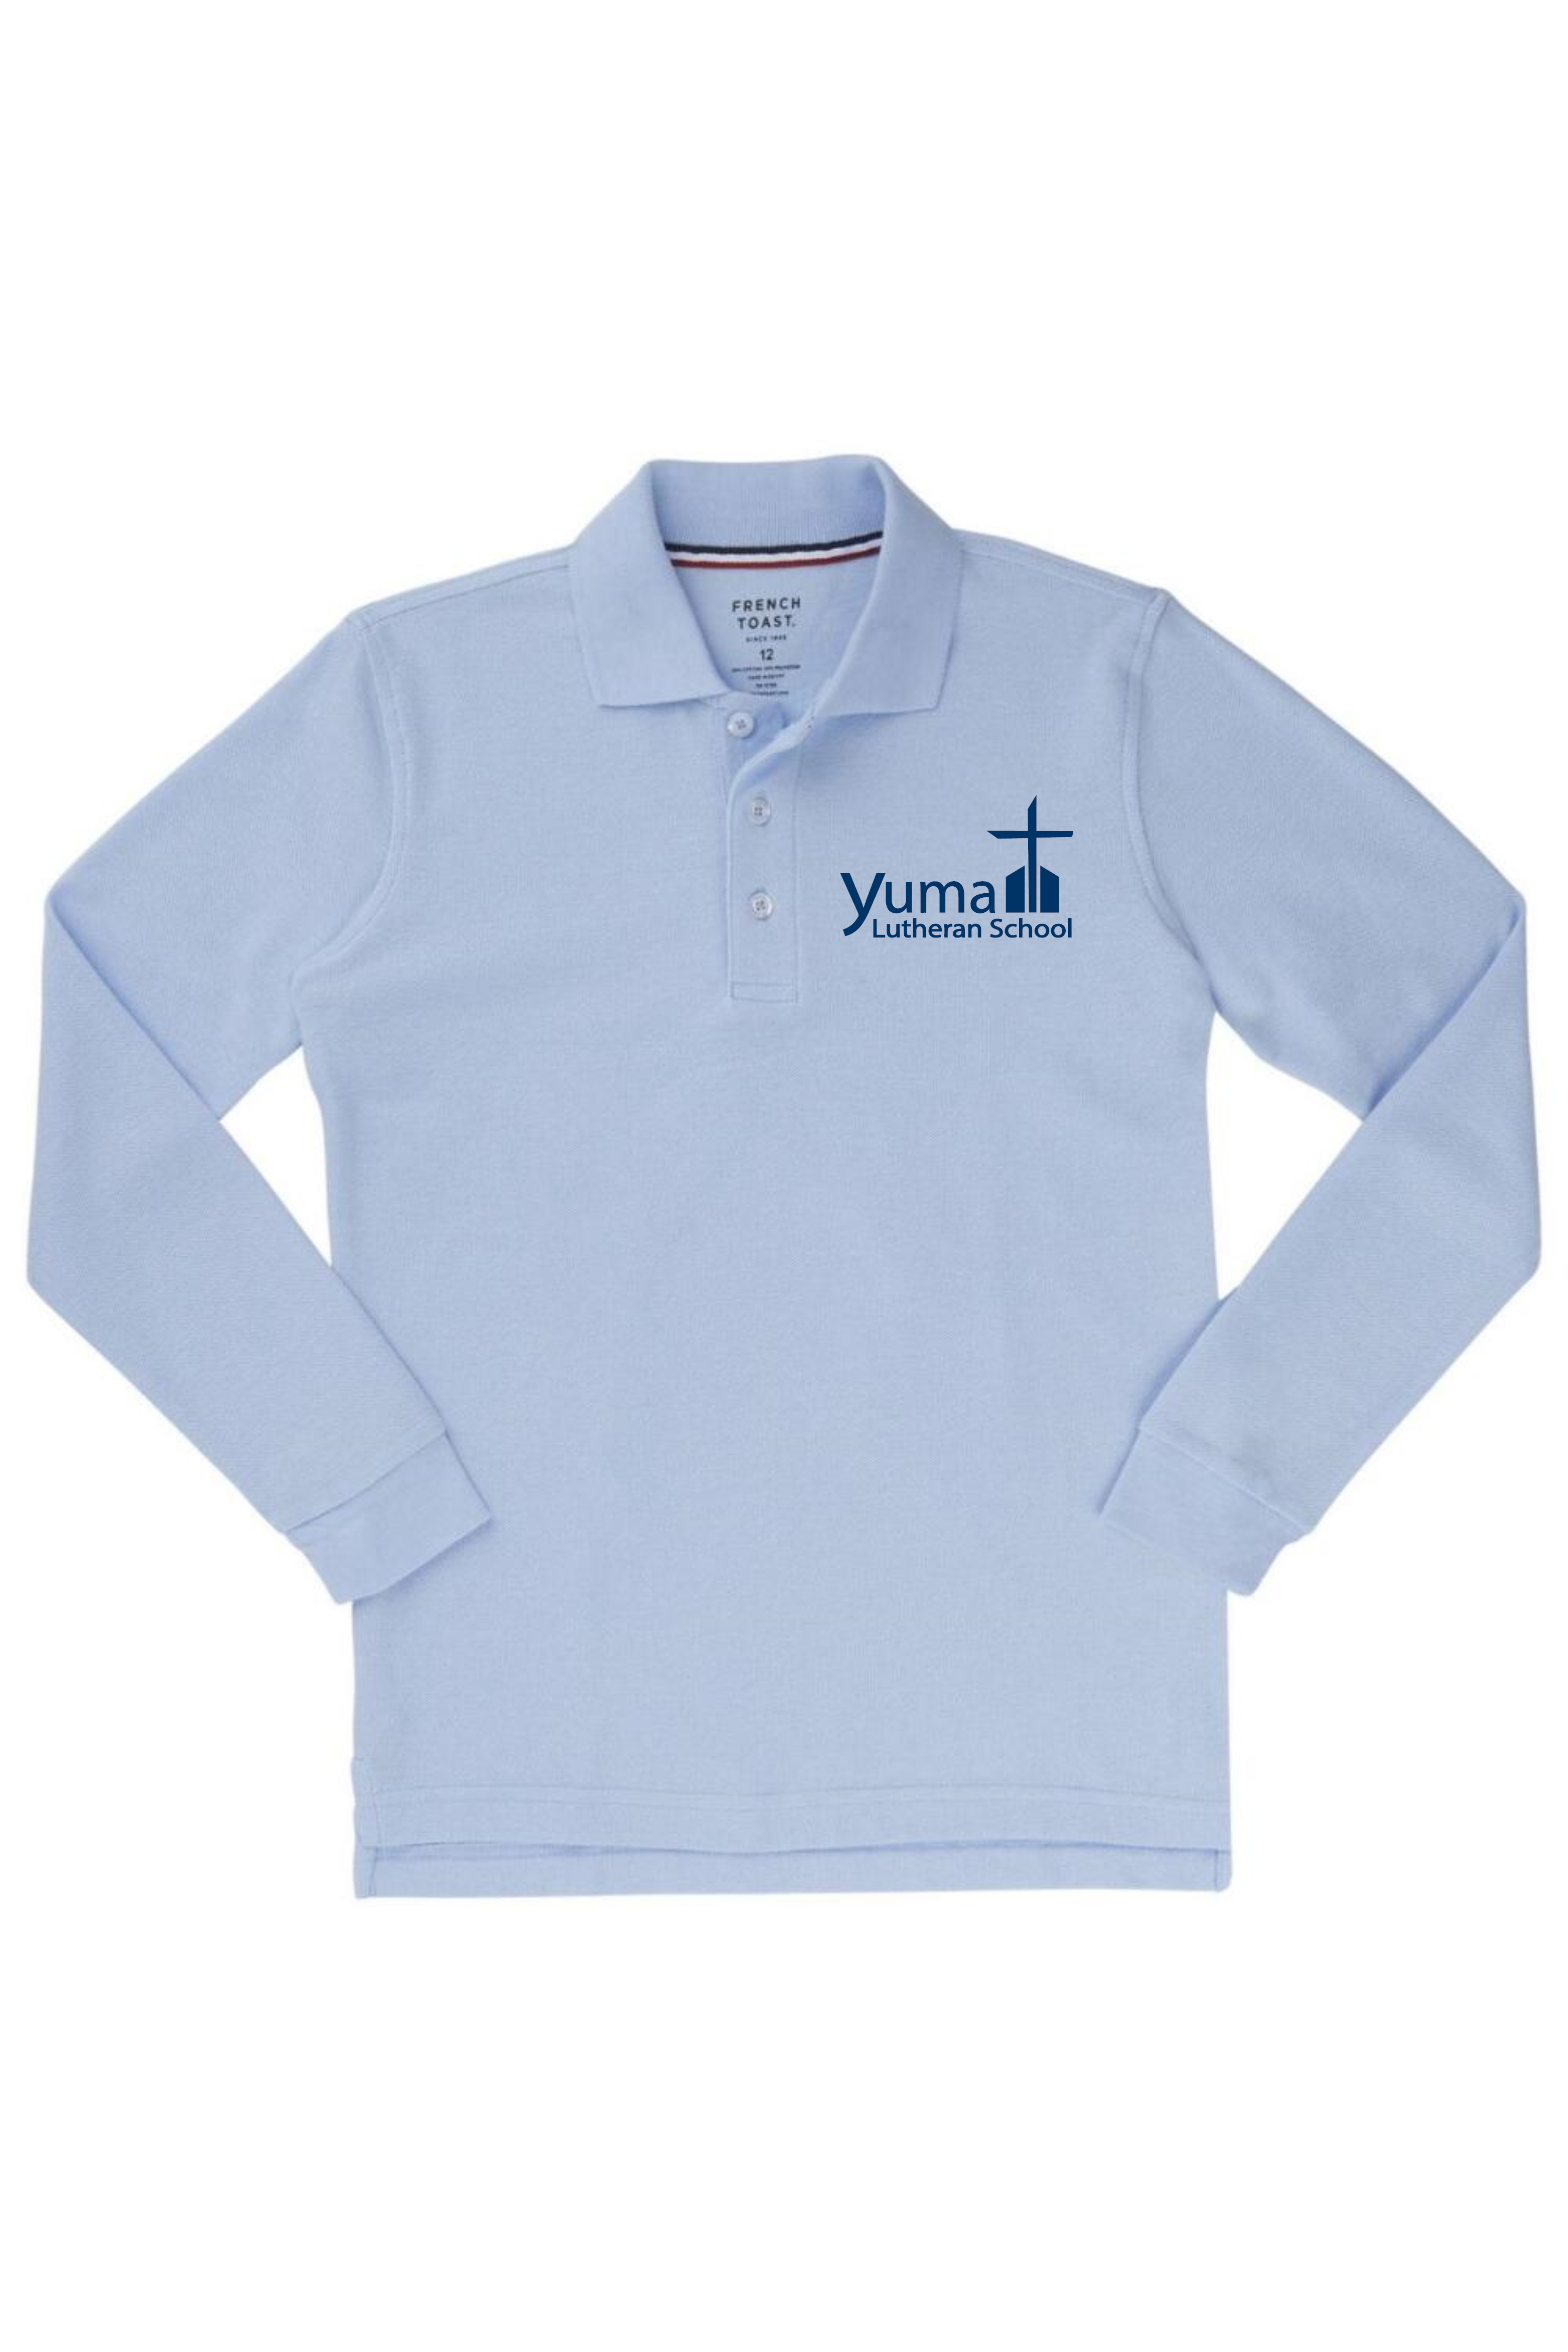 French Toast Boy's Long Sleeve Pique Polo (Polo Size: XS - 4/5, French Toast Polo Color: Lt Blue - YLS)